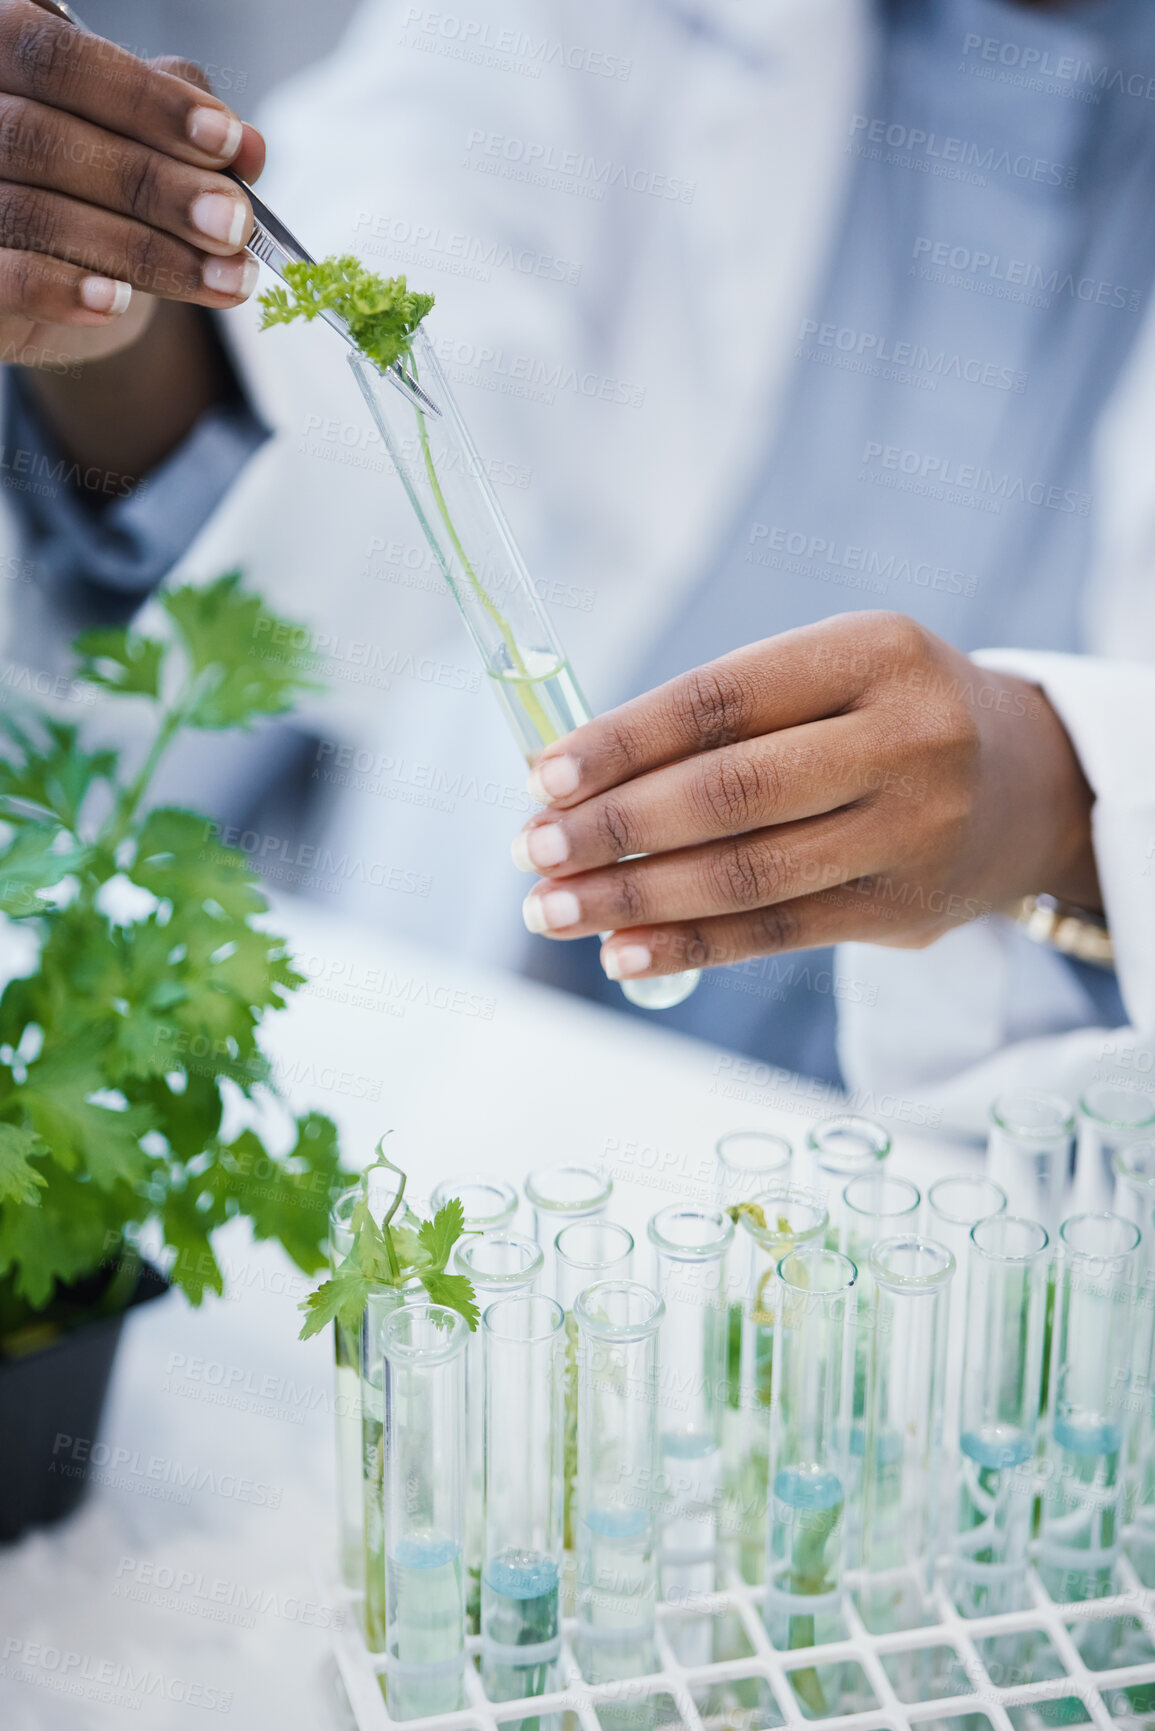 Buy stock photo Hands, plant and scientist in laboratory with test tubes, experiment or research on leaves, growth or agriculture study. Science, biotechnology worker or education studying ecology or climate change